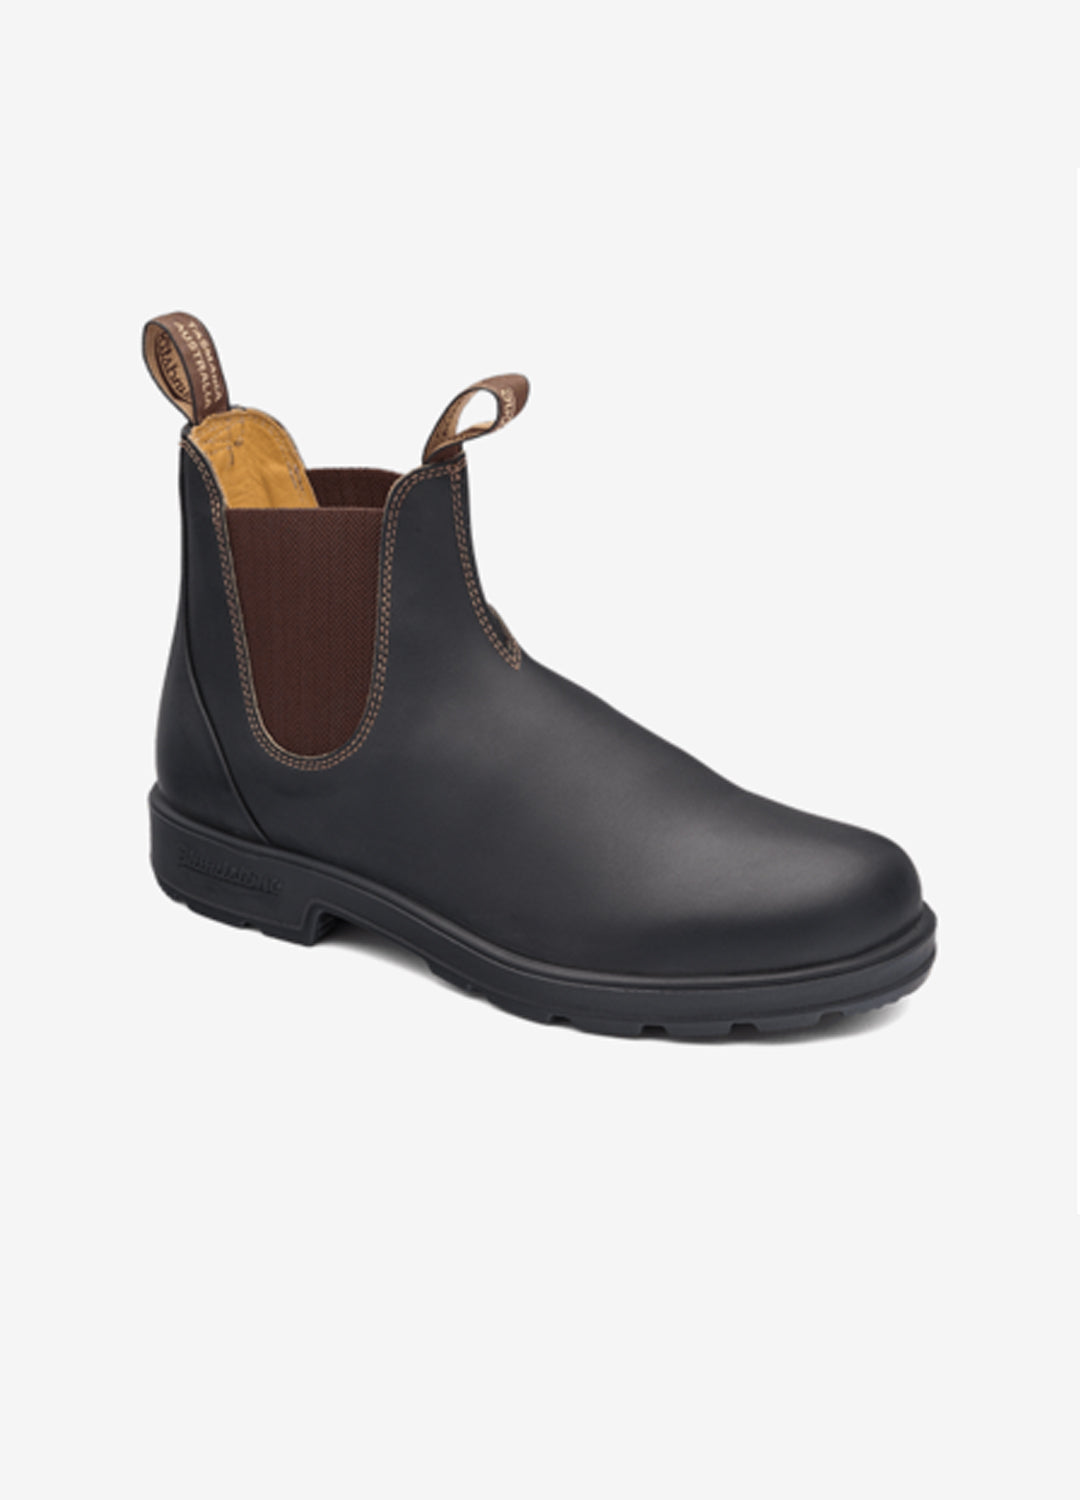 Blundstone 600. Blundstone Boots Adelaide